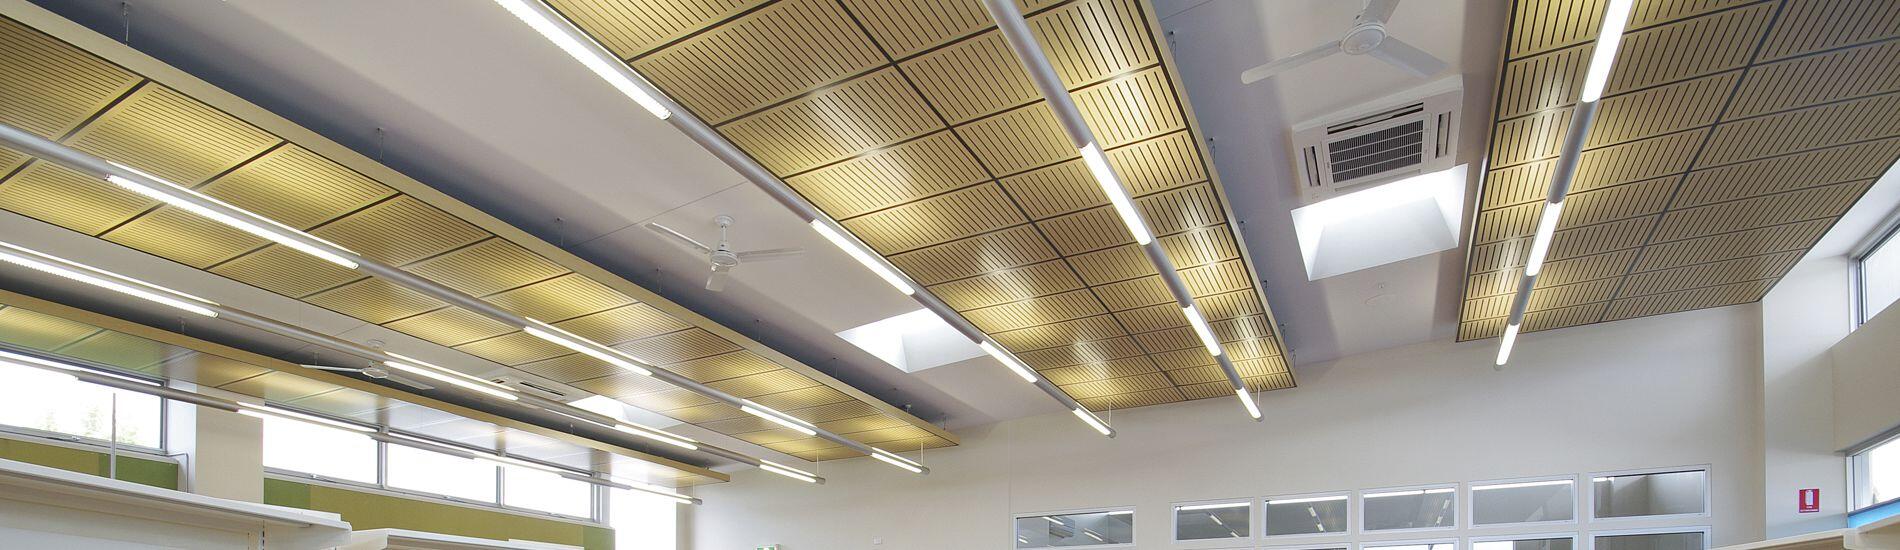 SUPATILE Ceiling Tiles Solve Noise Reverberation and Create Aesthetics in School Library